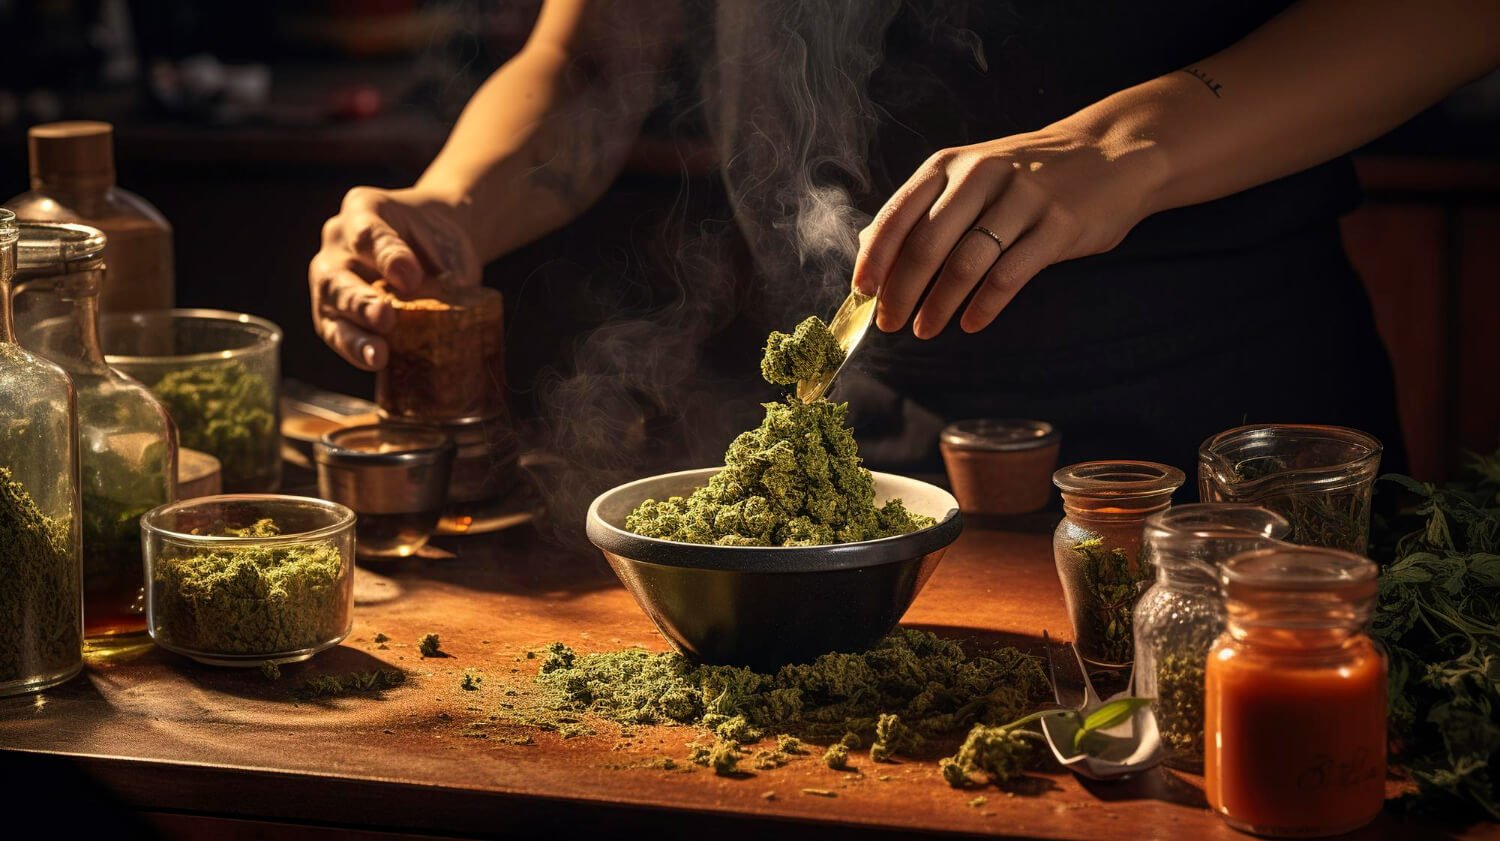 Cloth & Flame offer unique cannabis-infused dinning experiences